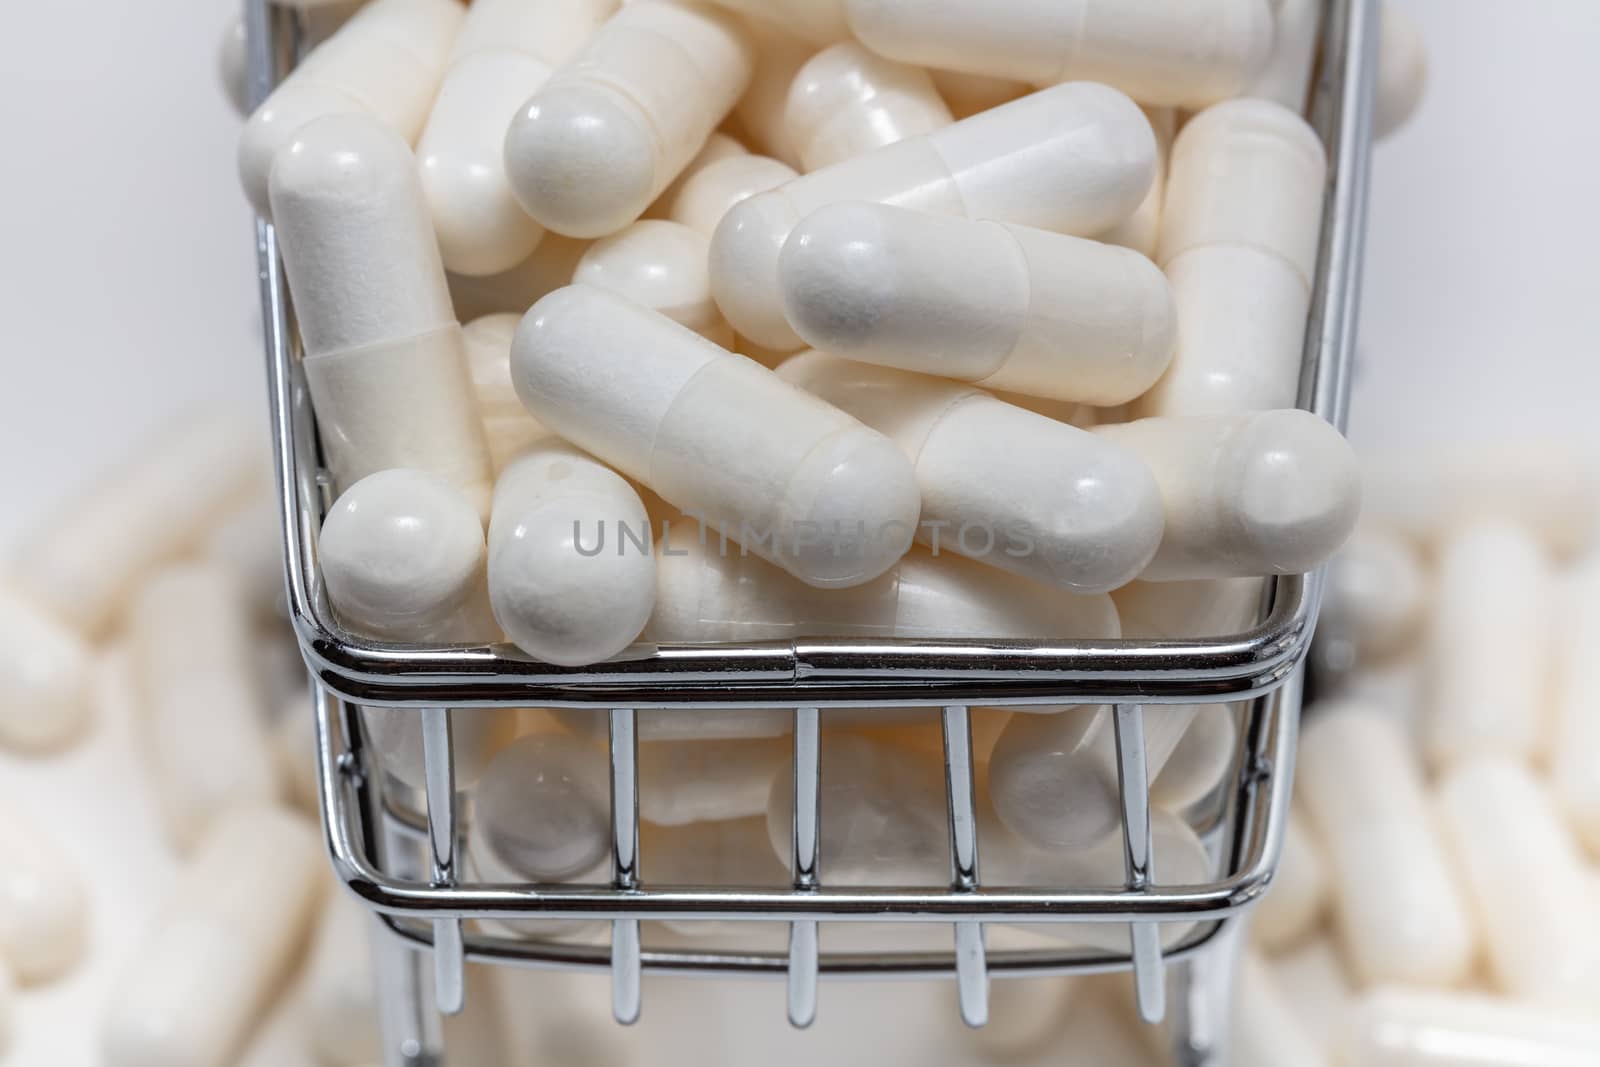 High angle shot of a small shopping cart full of white pills. Some pills under the cart blurry in the background. White background. Close up shot. Shopping online, pharmaceutical business concepts. by DamantisZ